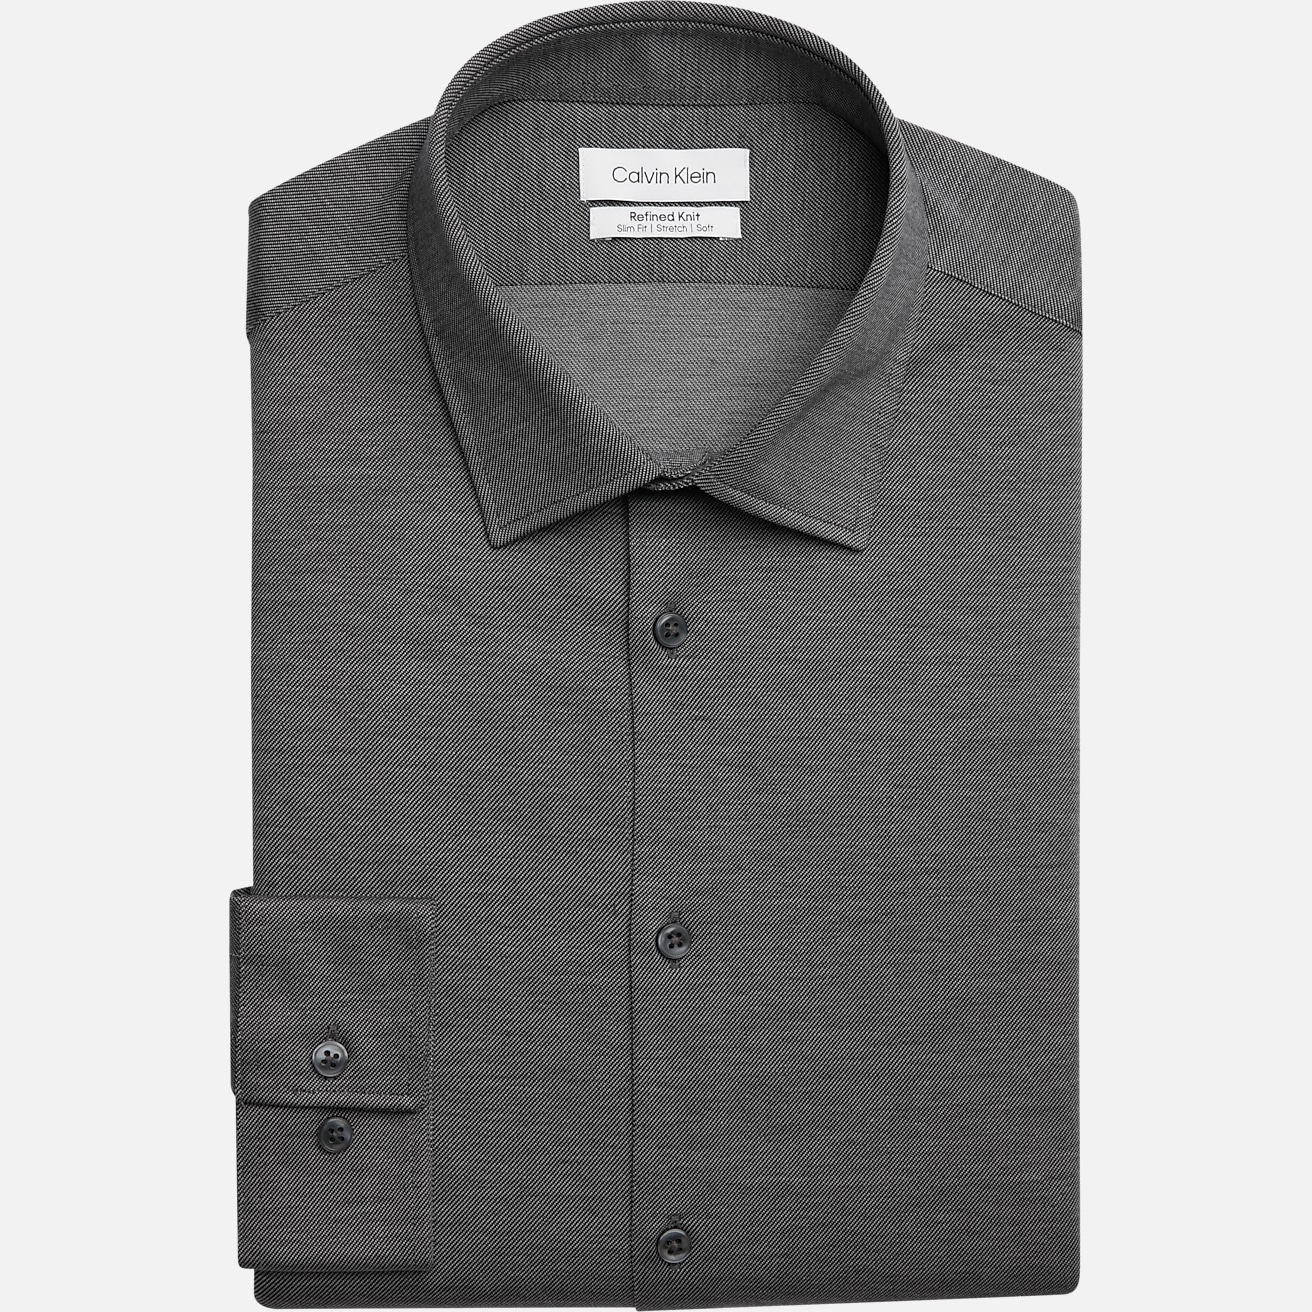 https://image.menswearhouse.com/is/image/TMW/TMW_5FWF_12_CALVIN_KLEIN_DRESS_SHIRTS_CHARCOAL_SOLID_MAIN?imPolicy=pdp-mob-2x